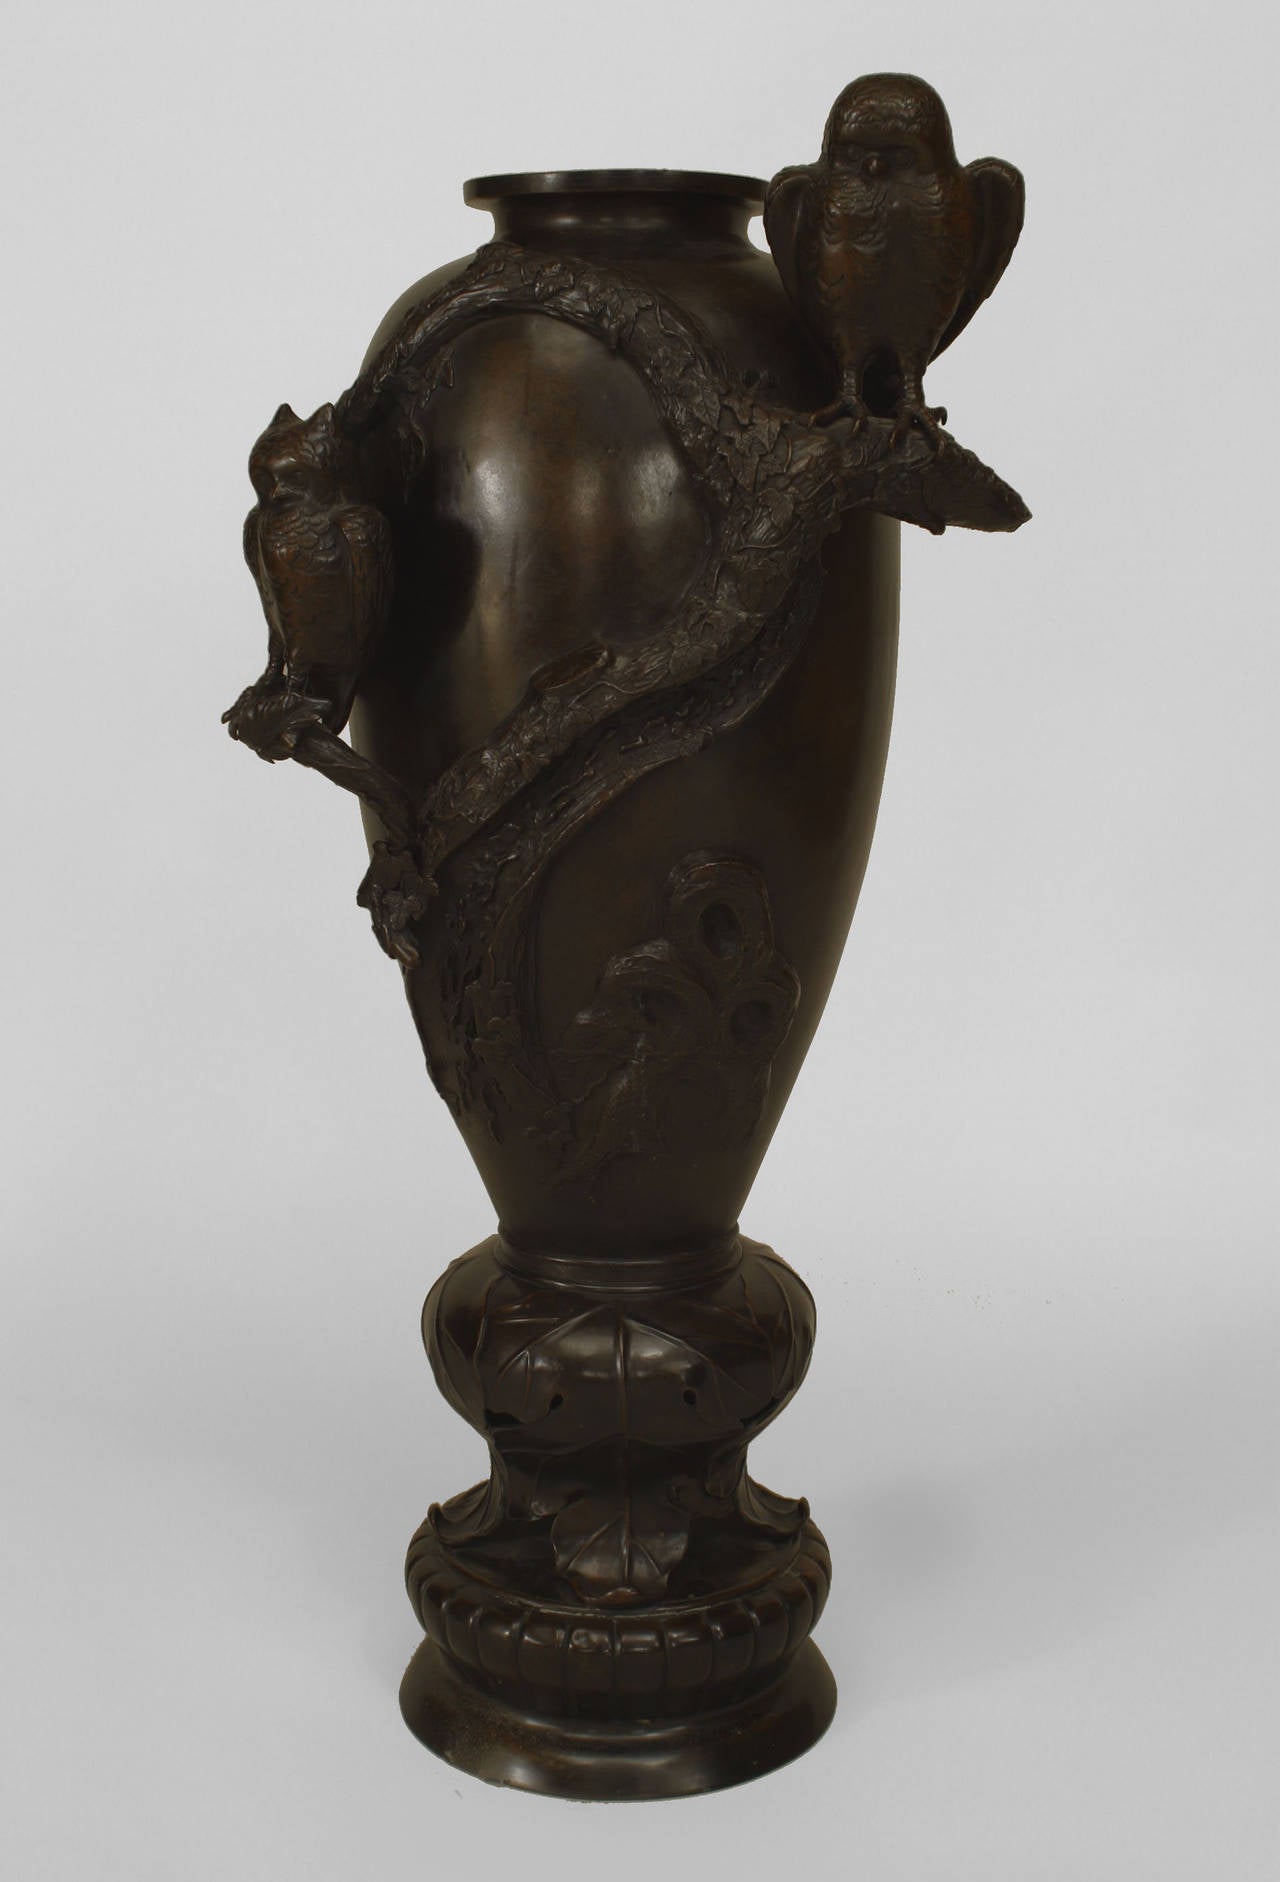 Asian Japanese bronze floor vase with 2 owls figures standing on branches with a leaf relief around a round base.
